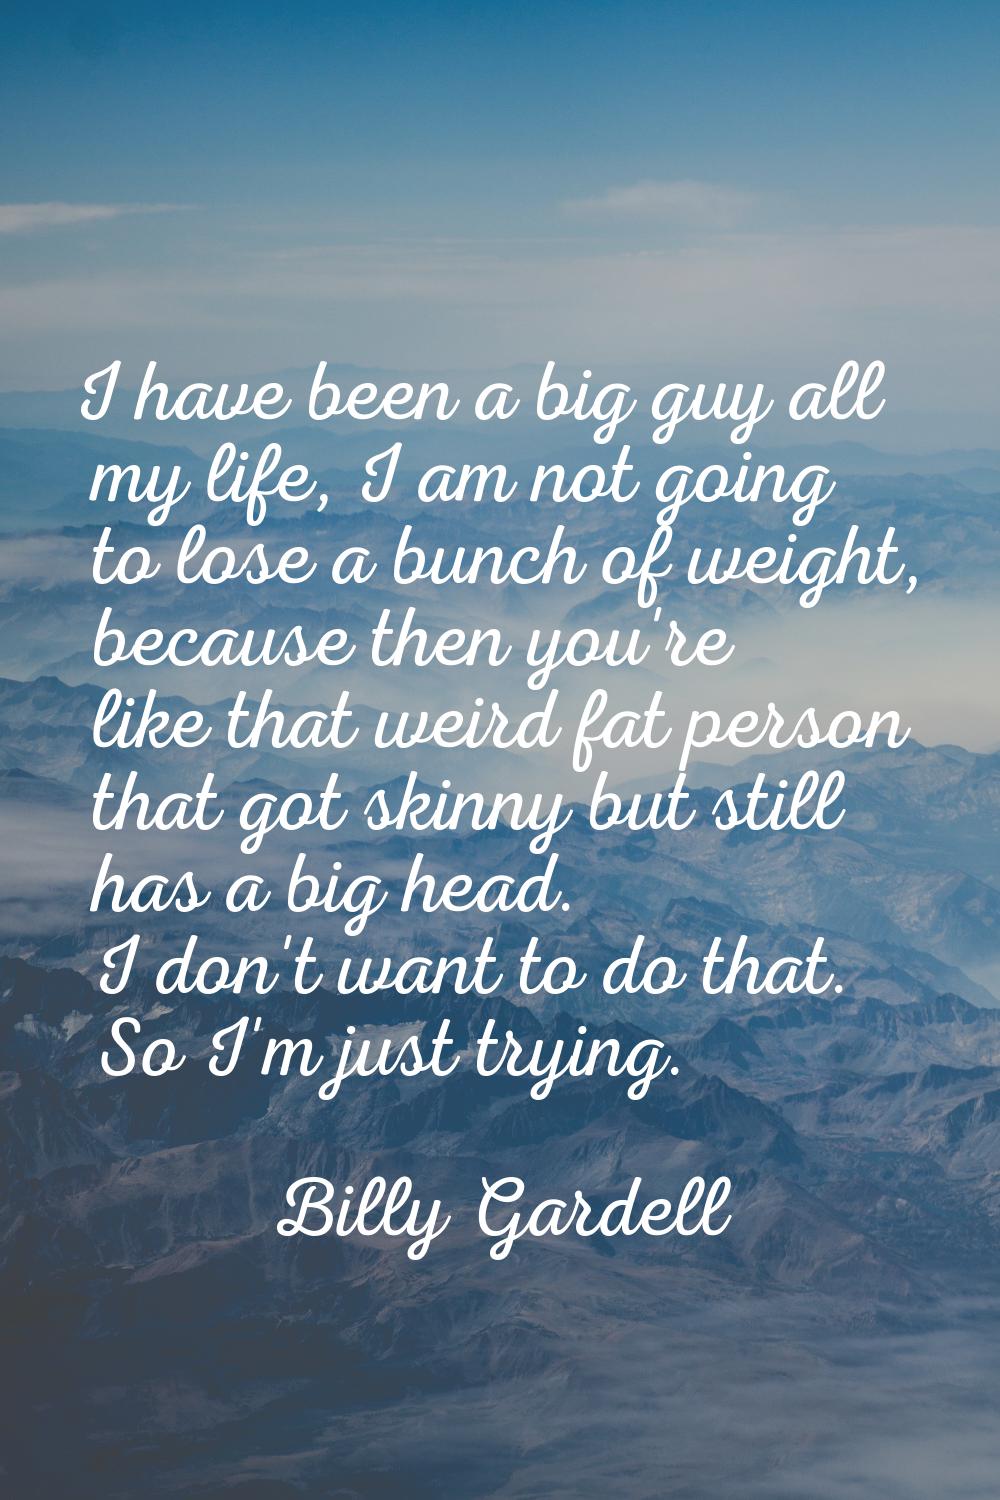 I have been a big guy all my life, I am not going to lose a bunch of weight, because then you're li